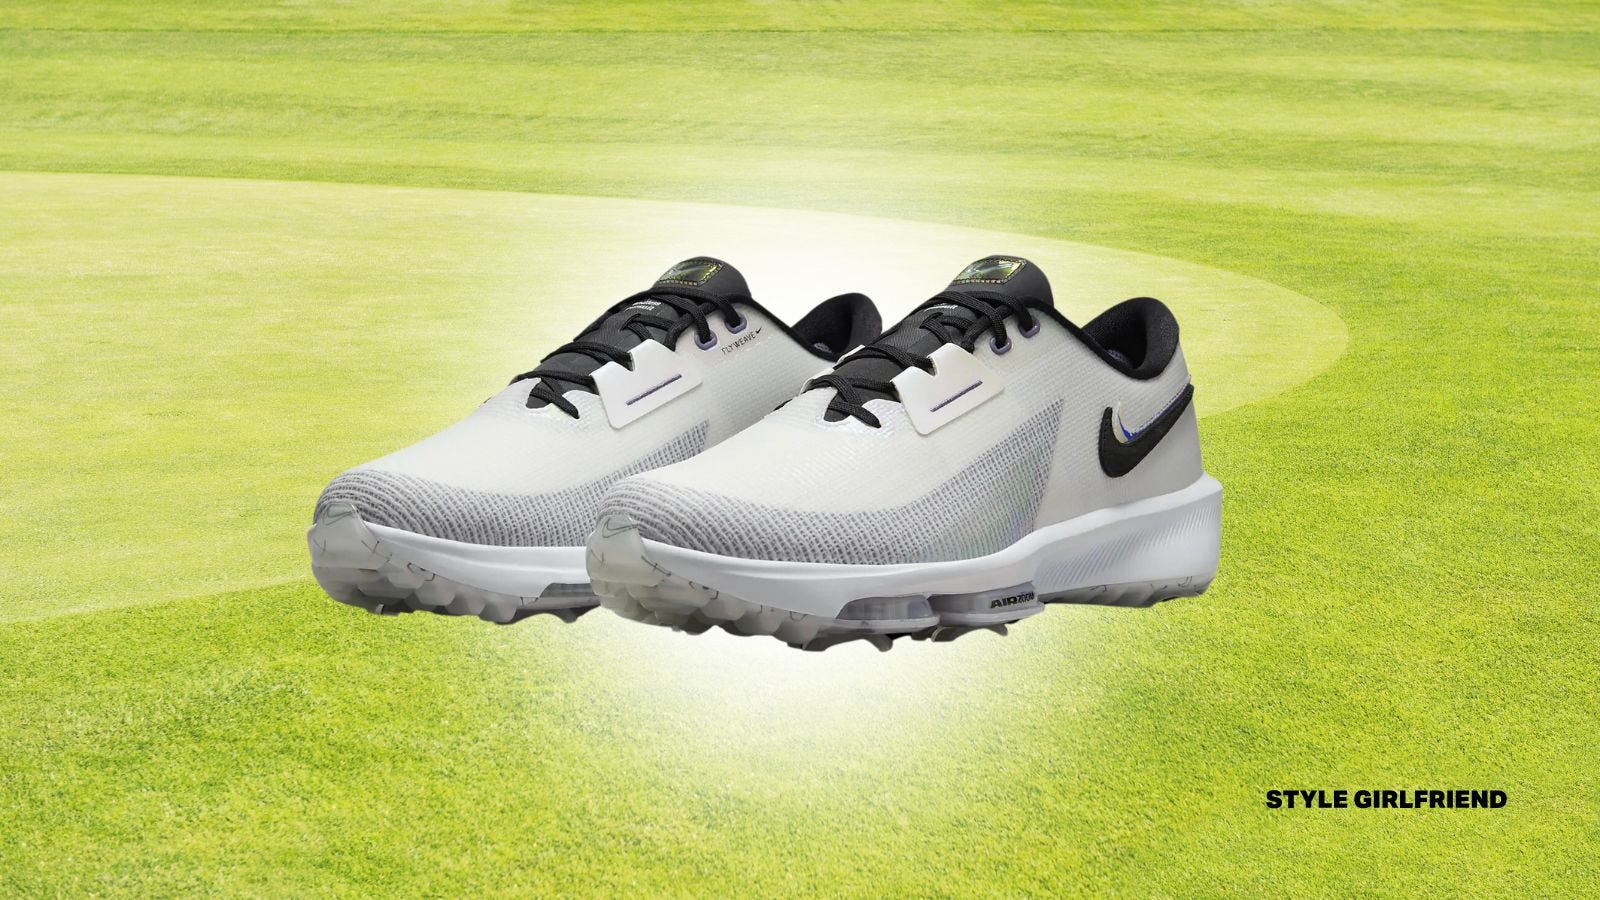 pair of men's spike golf shoes, set against a golf green background